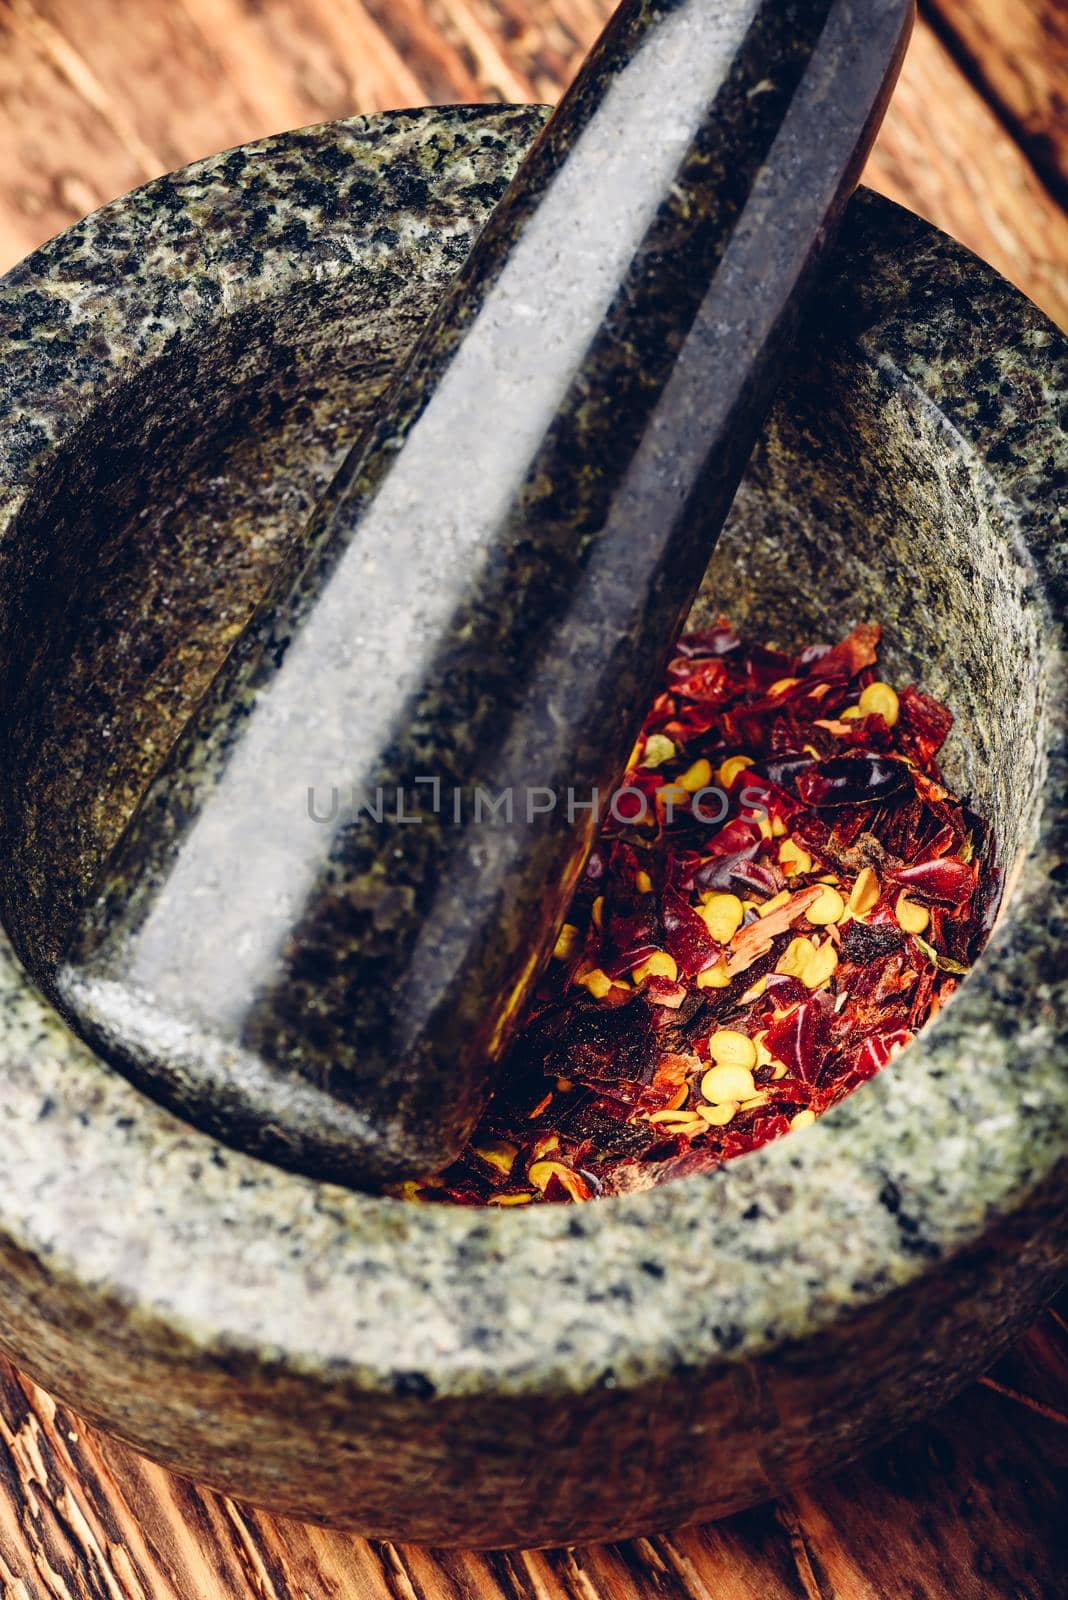 Red chili pepper grinded in mortar. High angle view